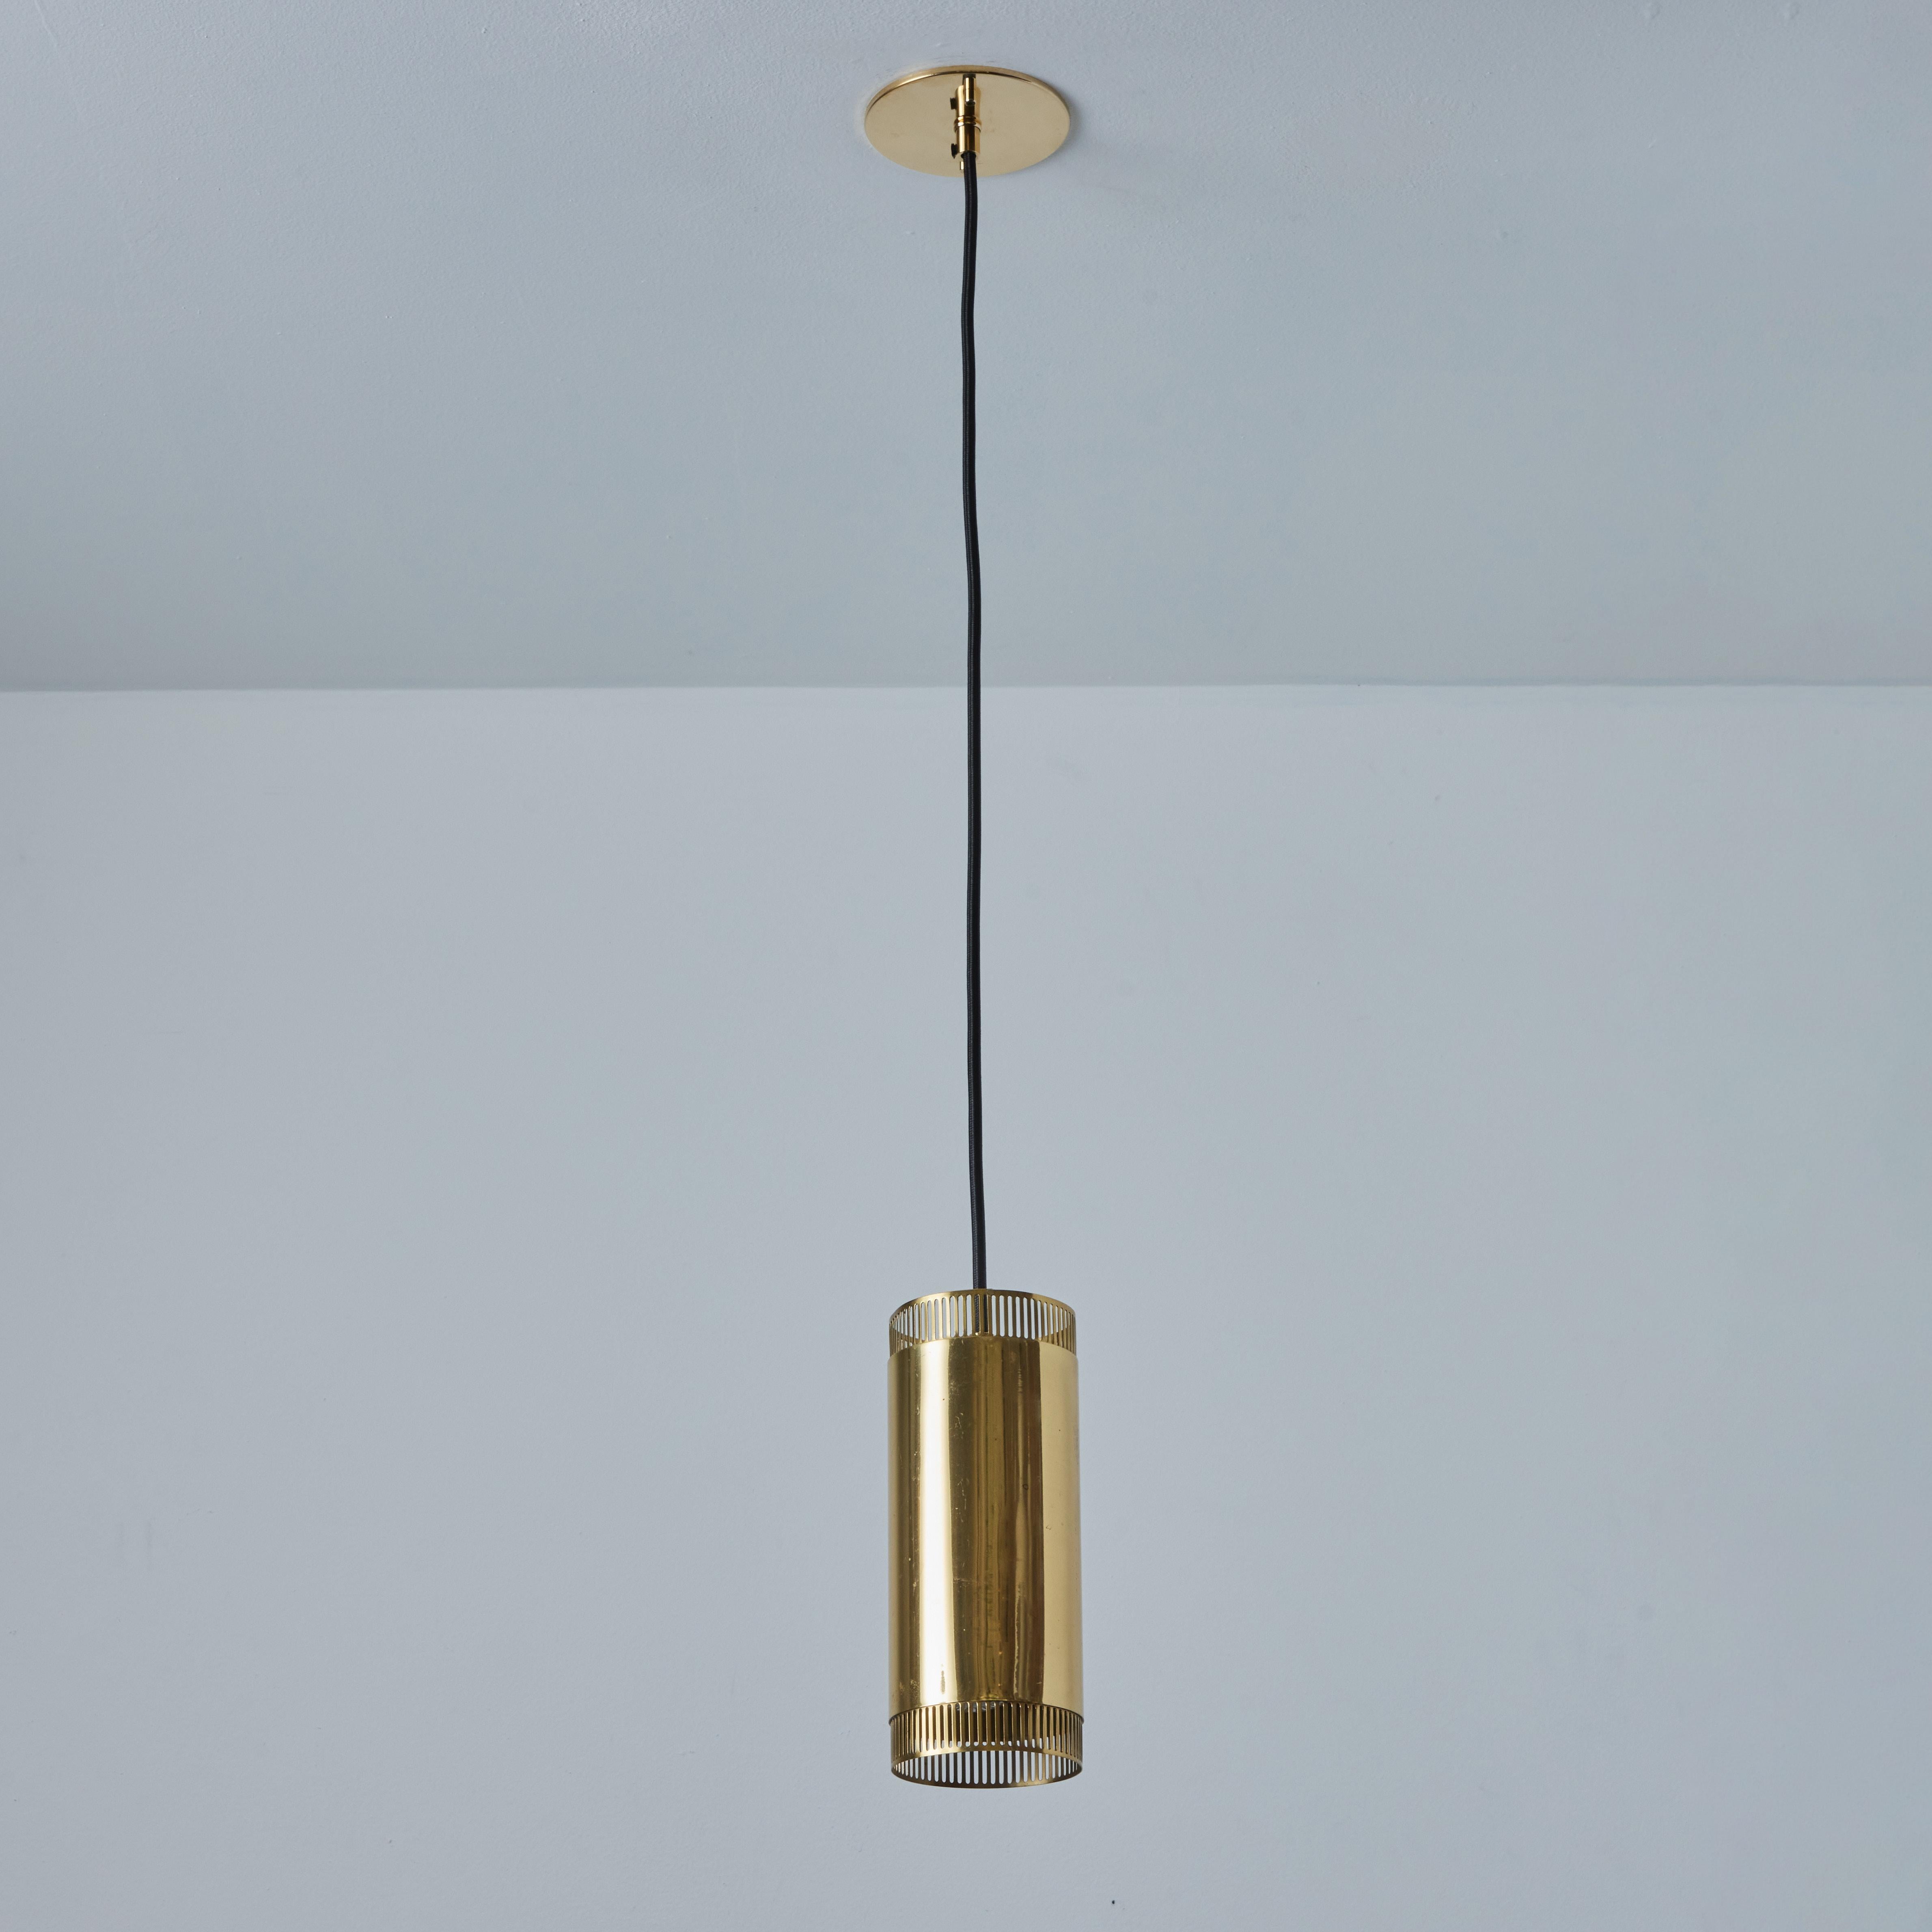 1960s Perforated Brass Cylindrical Pendant Attributed to Mauri Almari for Idman For Sale 4